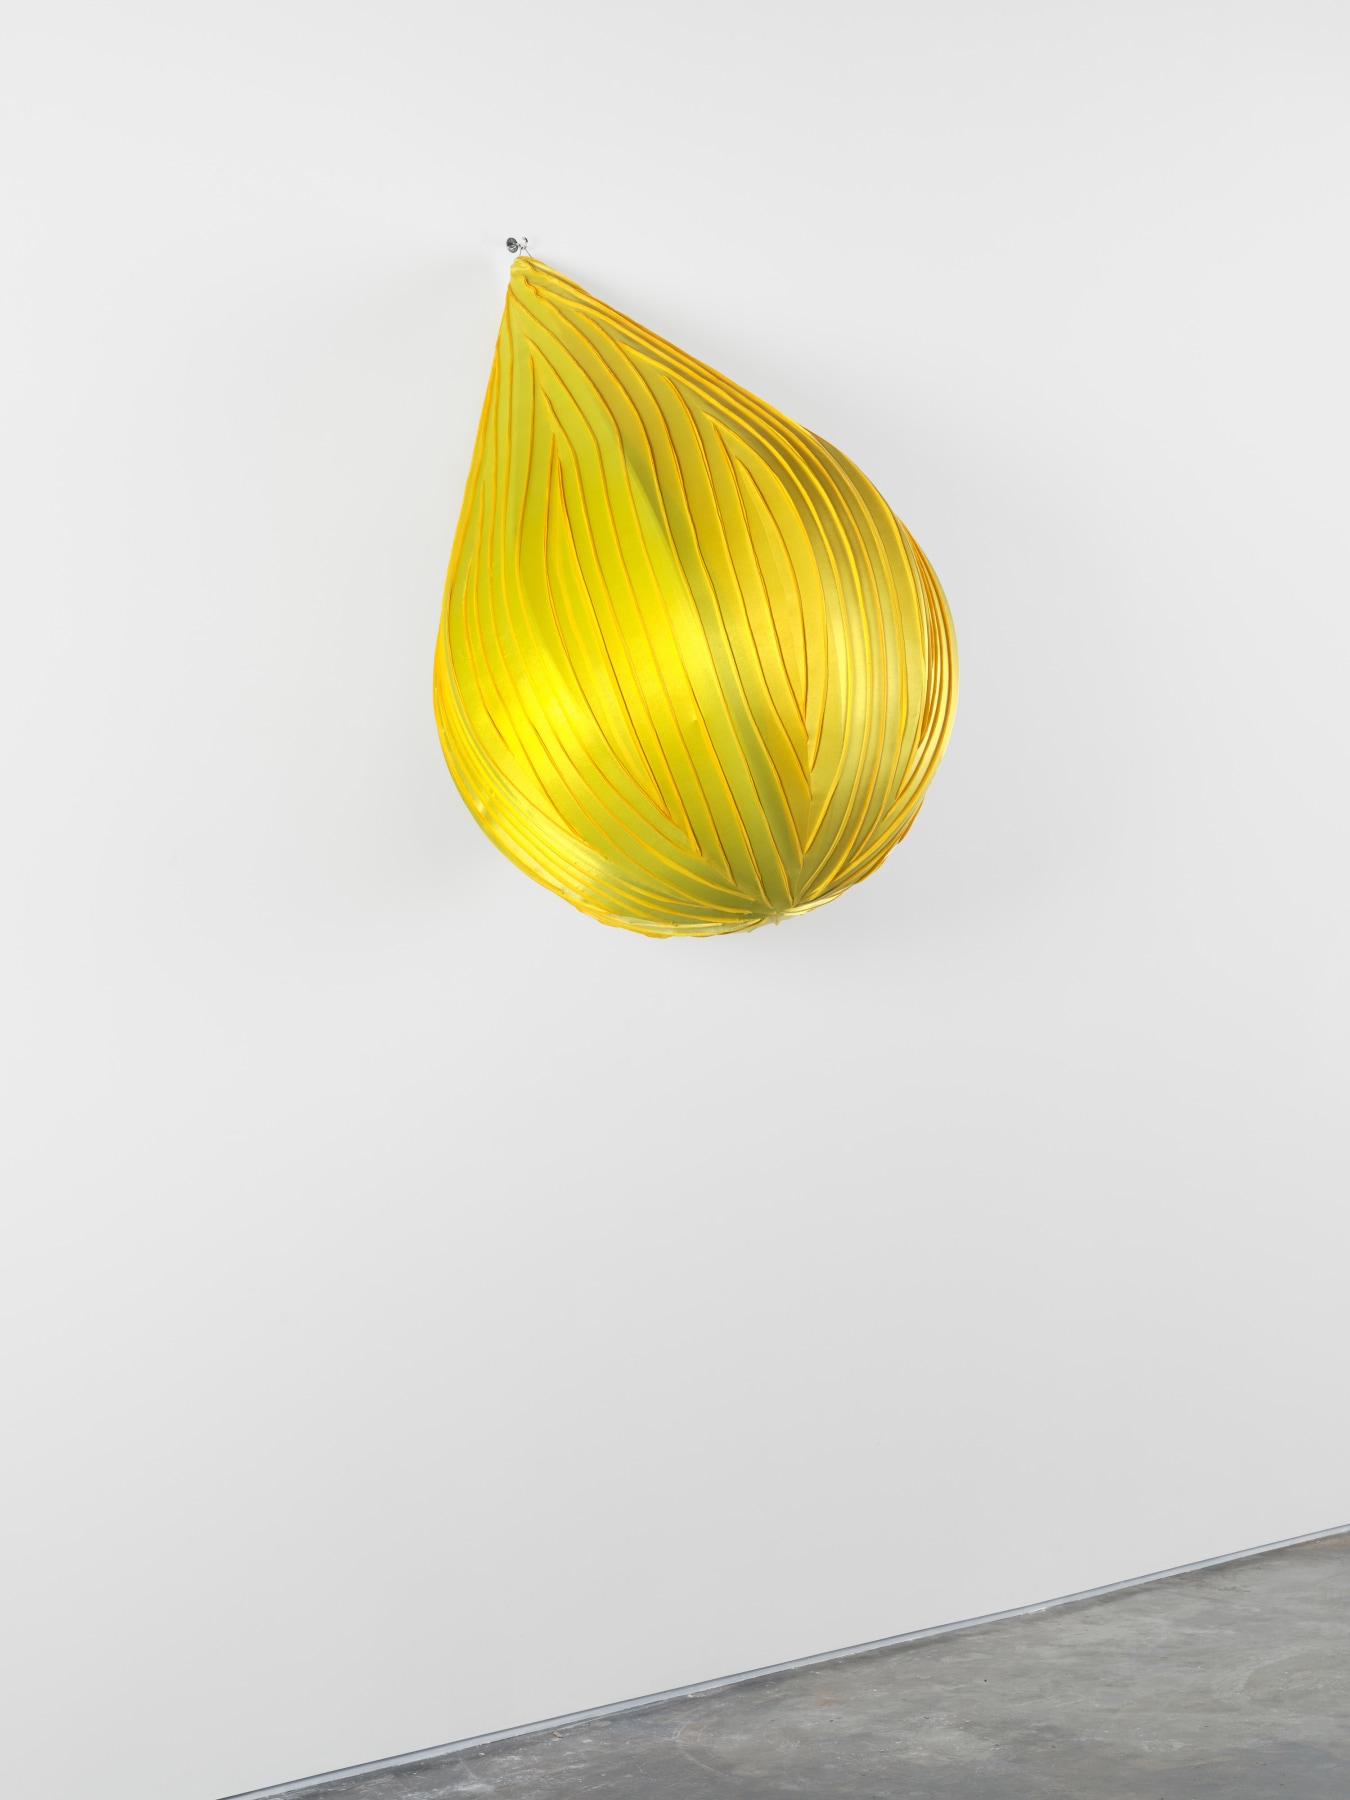 Anthony Olubunmi Akinbola artwork titled "Lemon Drop". Yellow durags stretched and sewn together over tear drop shape. 72 x 48 x 48 in (182.9 x 121.9 x 121.9 cm), durags on wood frame, 2023.